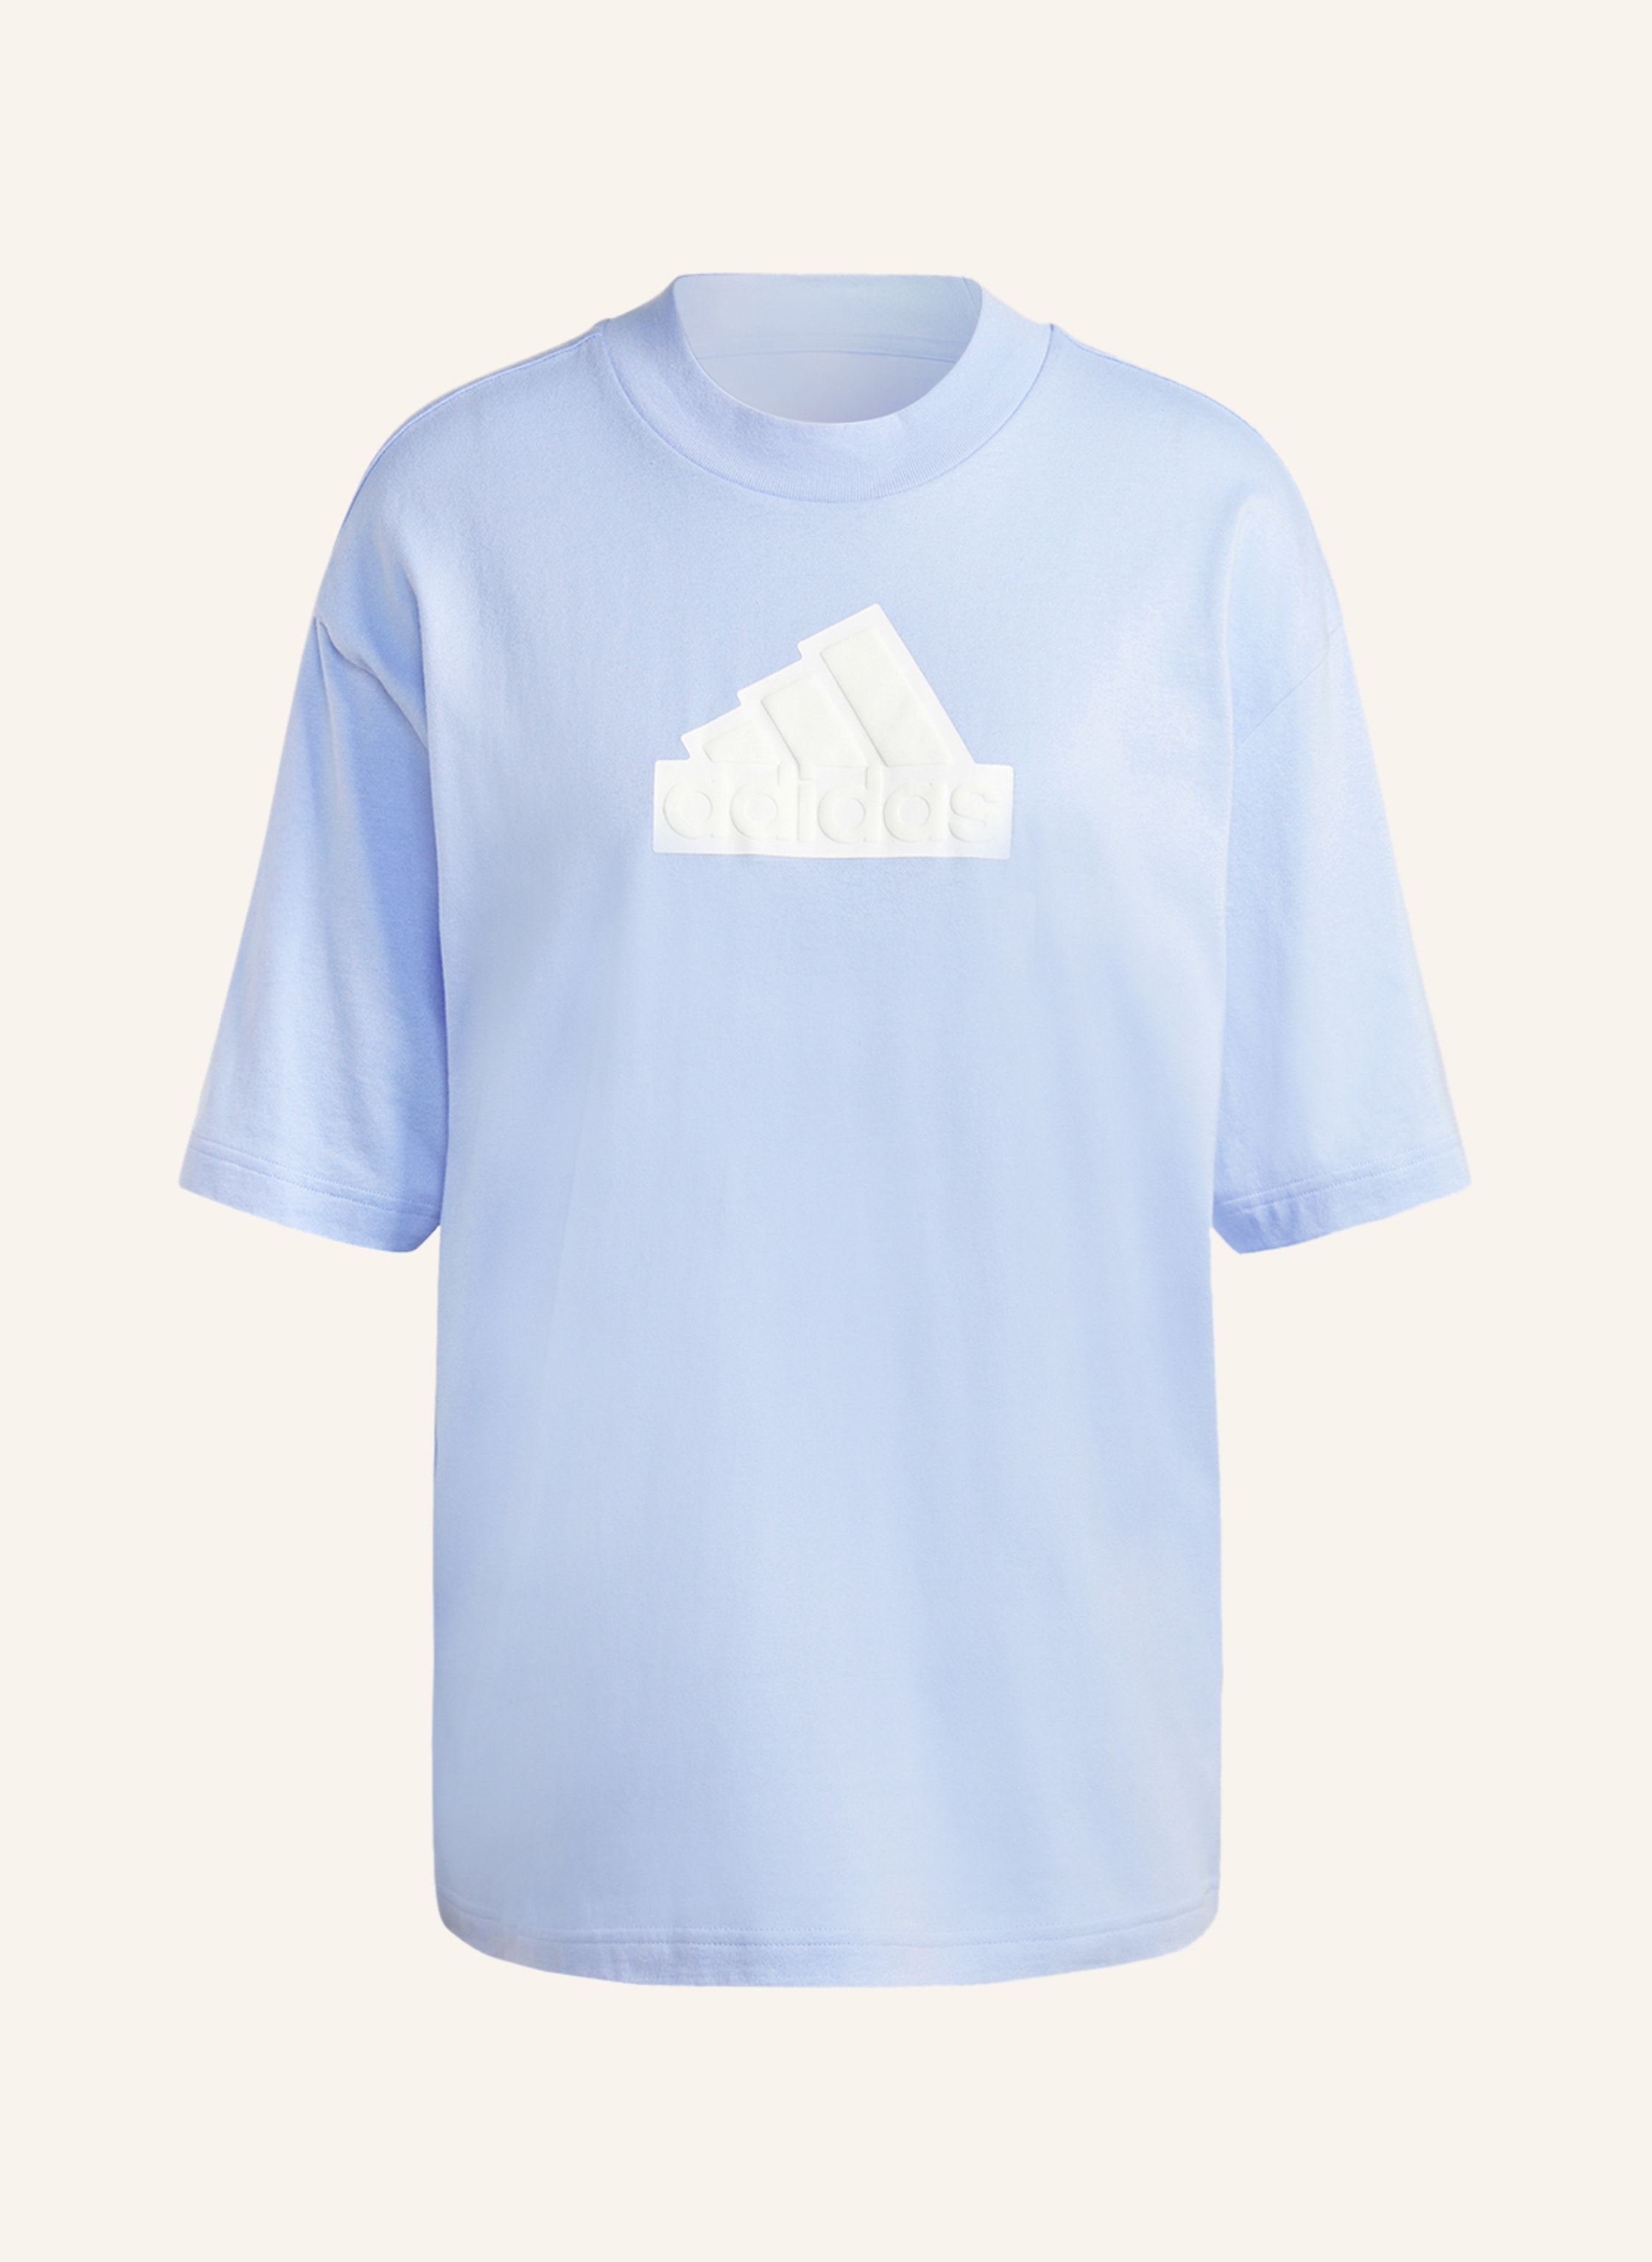 Maan oppervlakte campagne bijnaam adidas T-shirt FUTURE ICONS in light blue